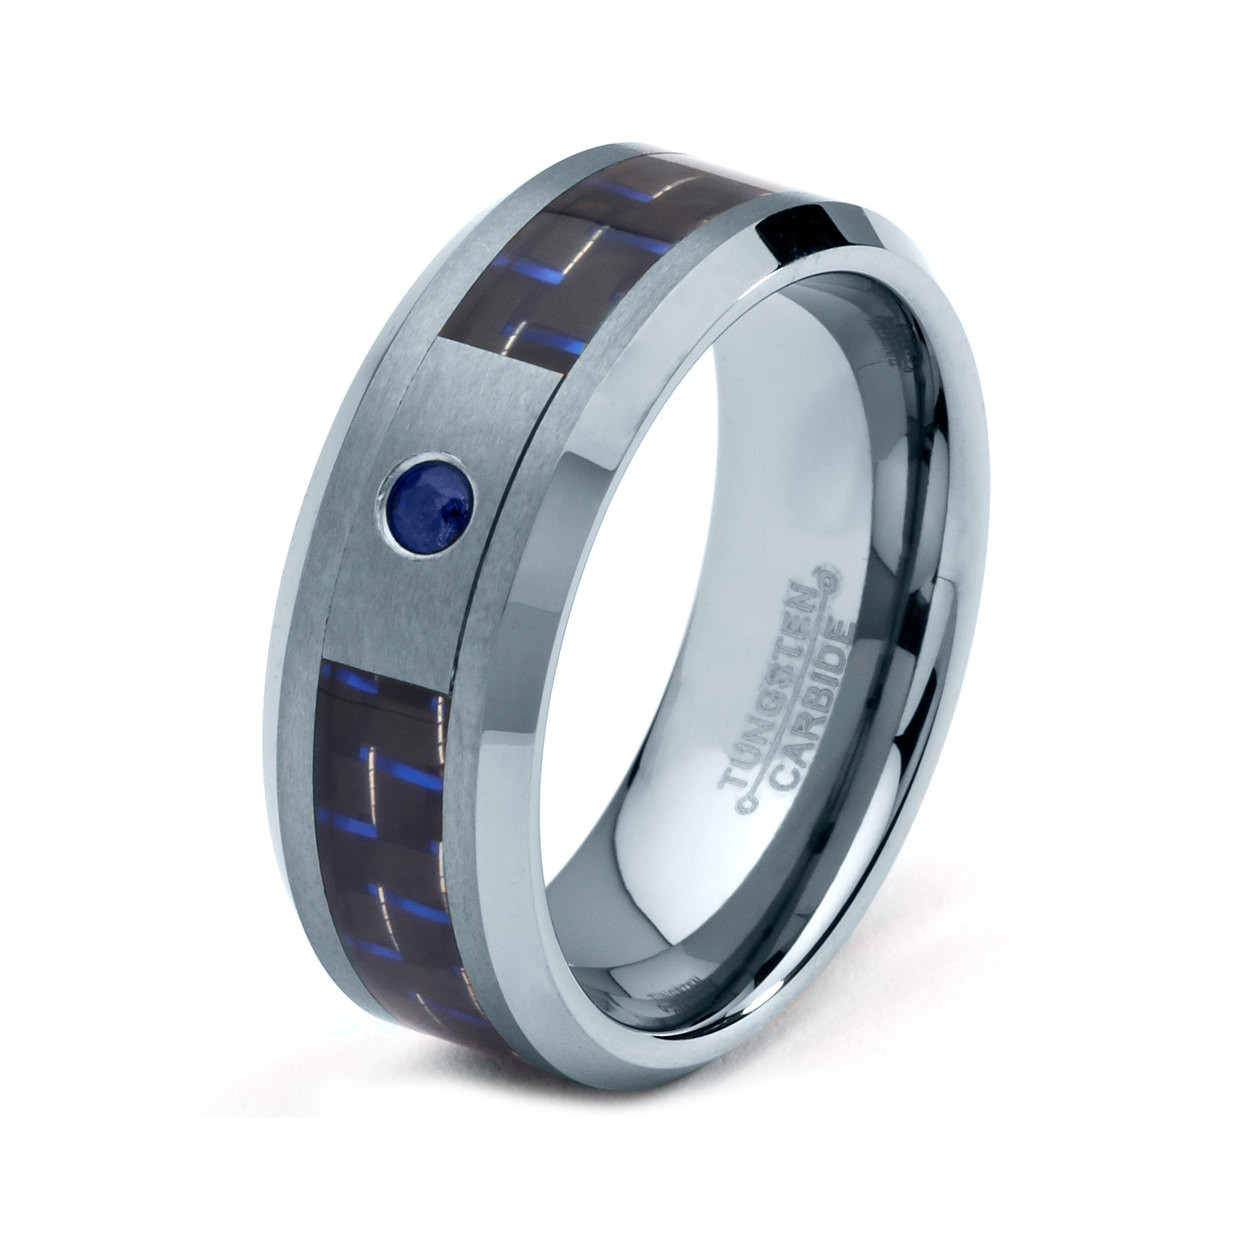 Mens Wedding Bands Tungsten Carbide
 Unavailable Listing on Etsy